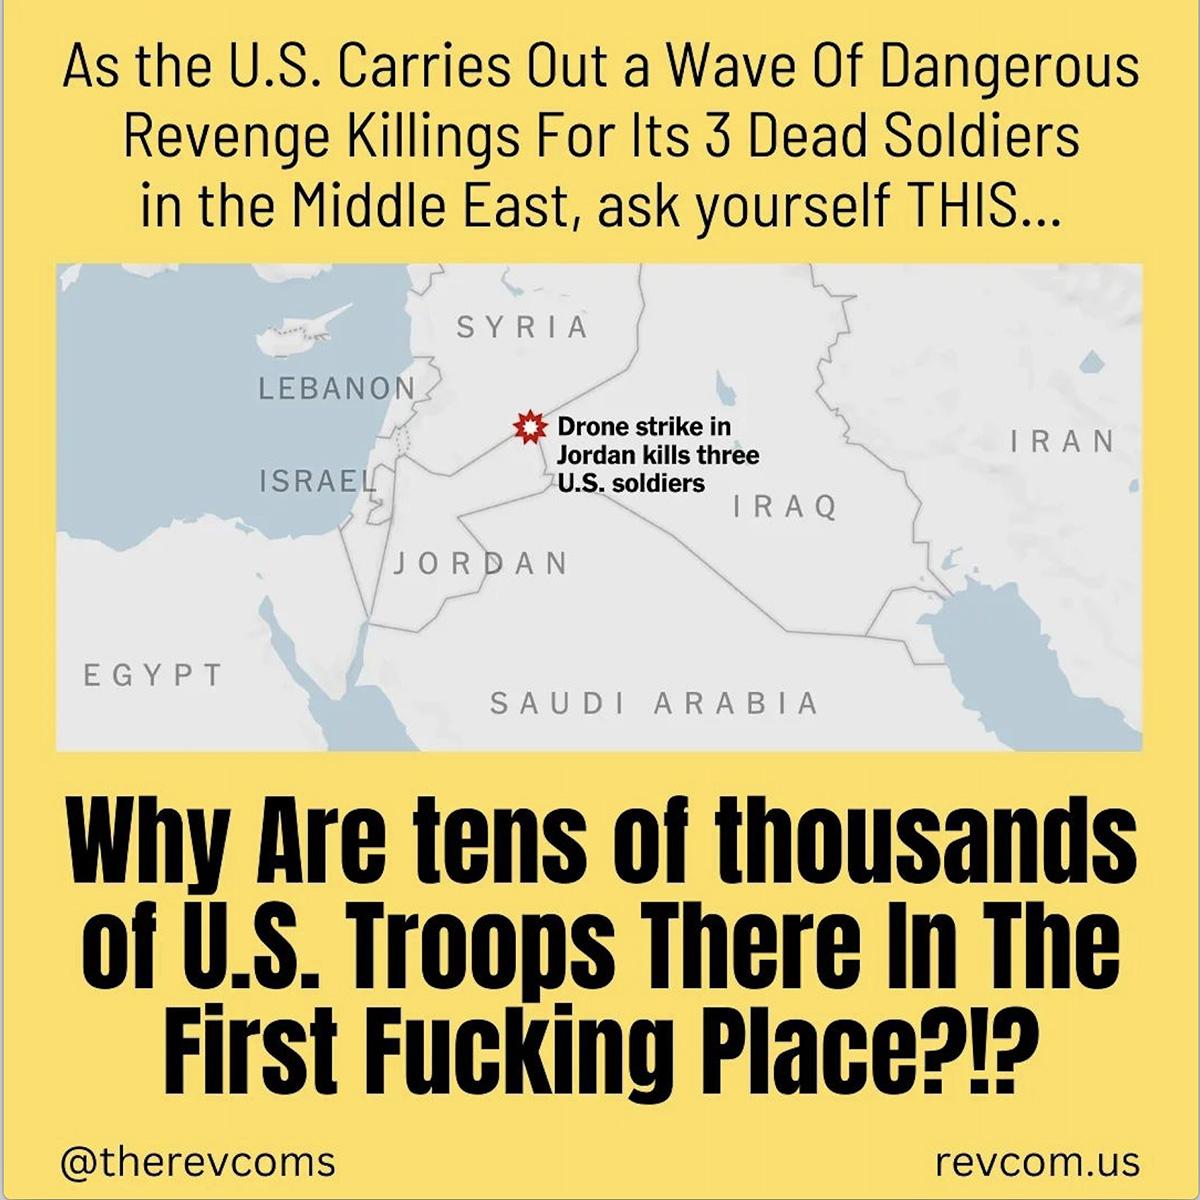 Why are tens of thousands of U.S. troops there in the first fucking place?